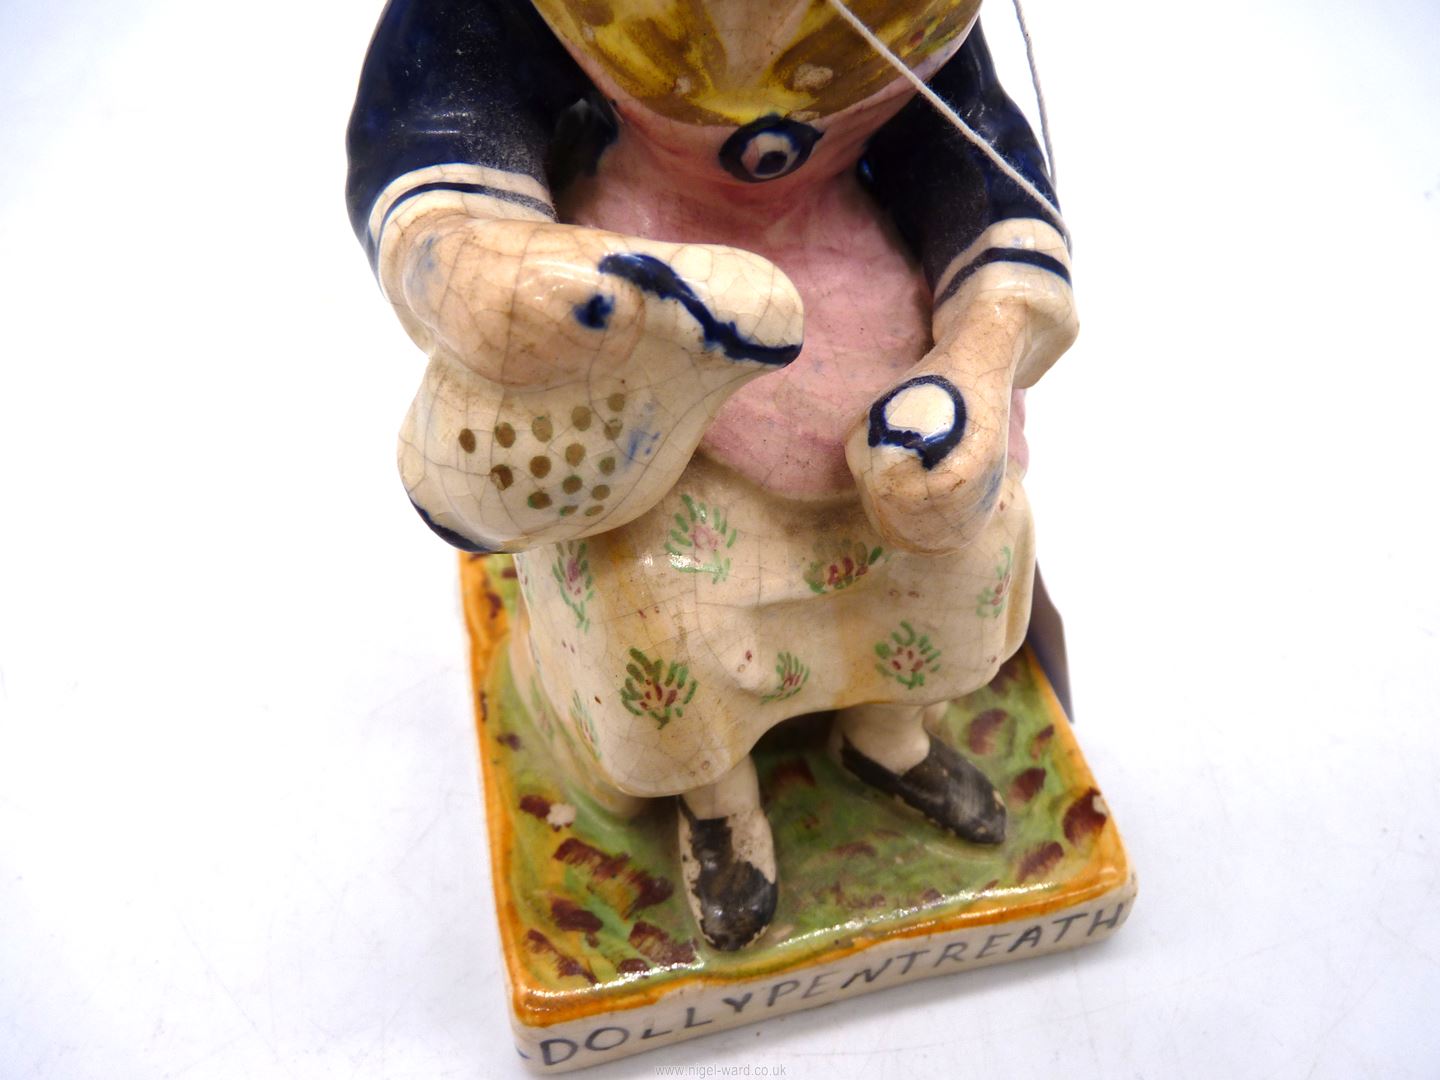 A Staffordshire figure of Dolly Pentreath - the last Cornish woman to speak the language, 7" tall. - Image 4 of 4